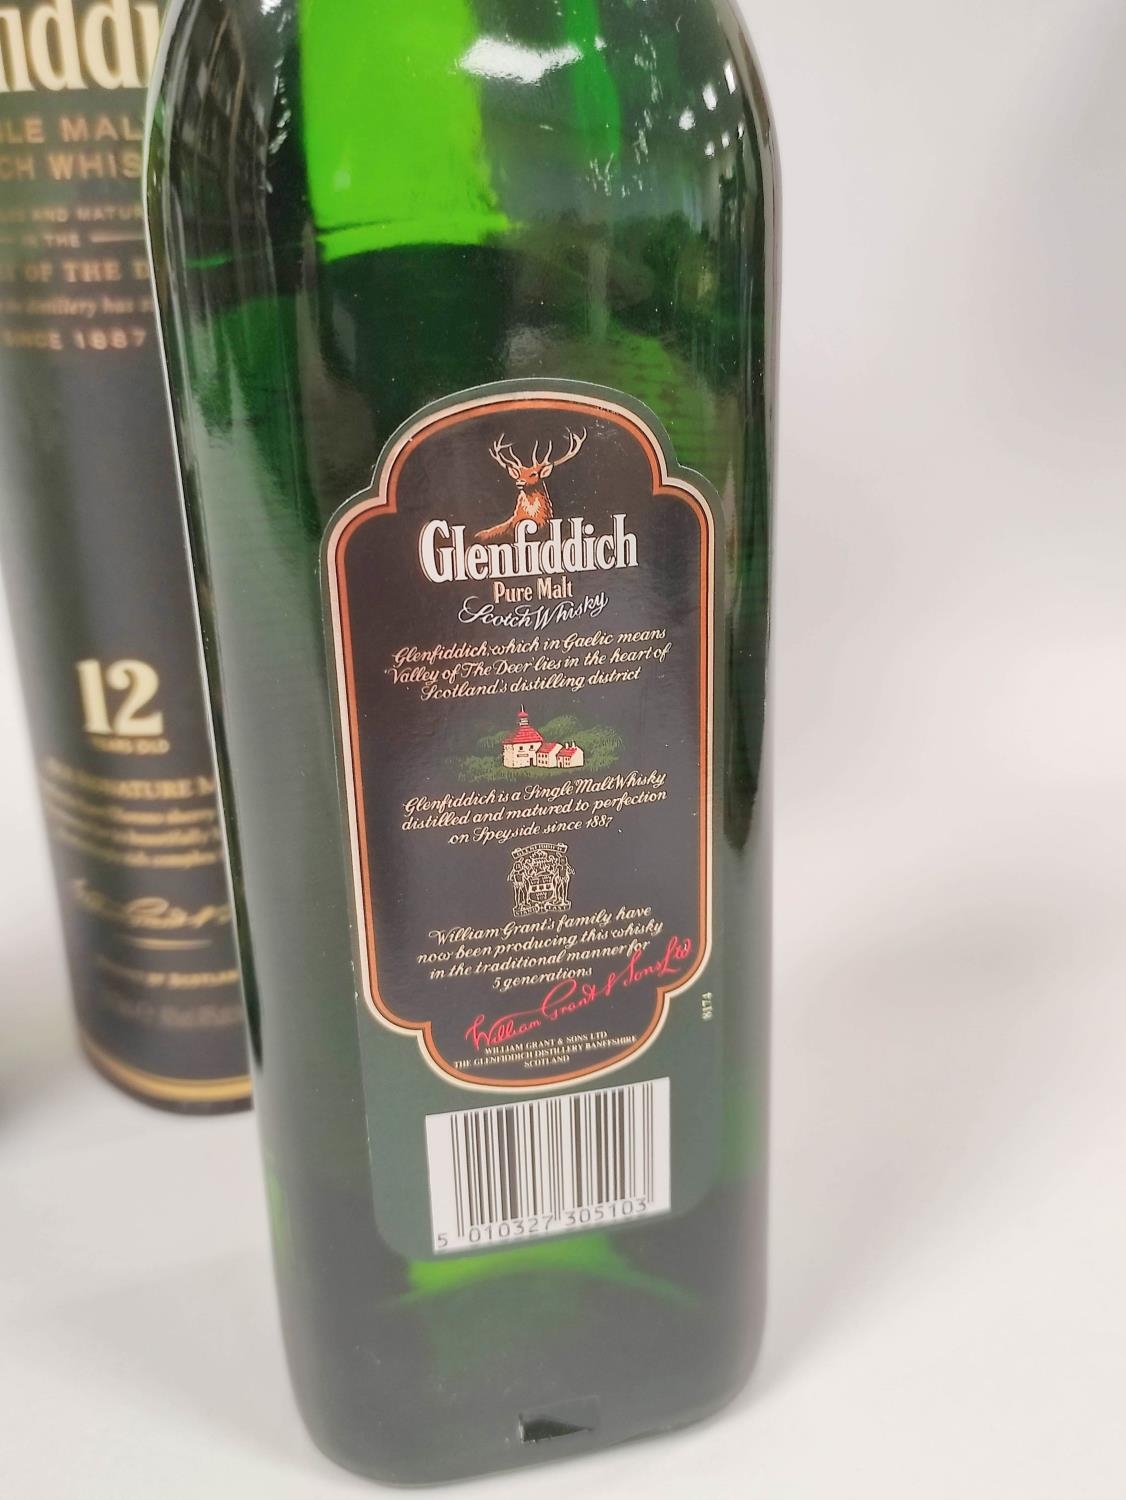 Glenfiddich 12 years old single malt Scotch whisky, 70cl, 40% vol, boxed, with Glenfiddich Special - Image 3 of 4